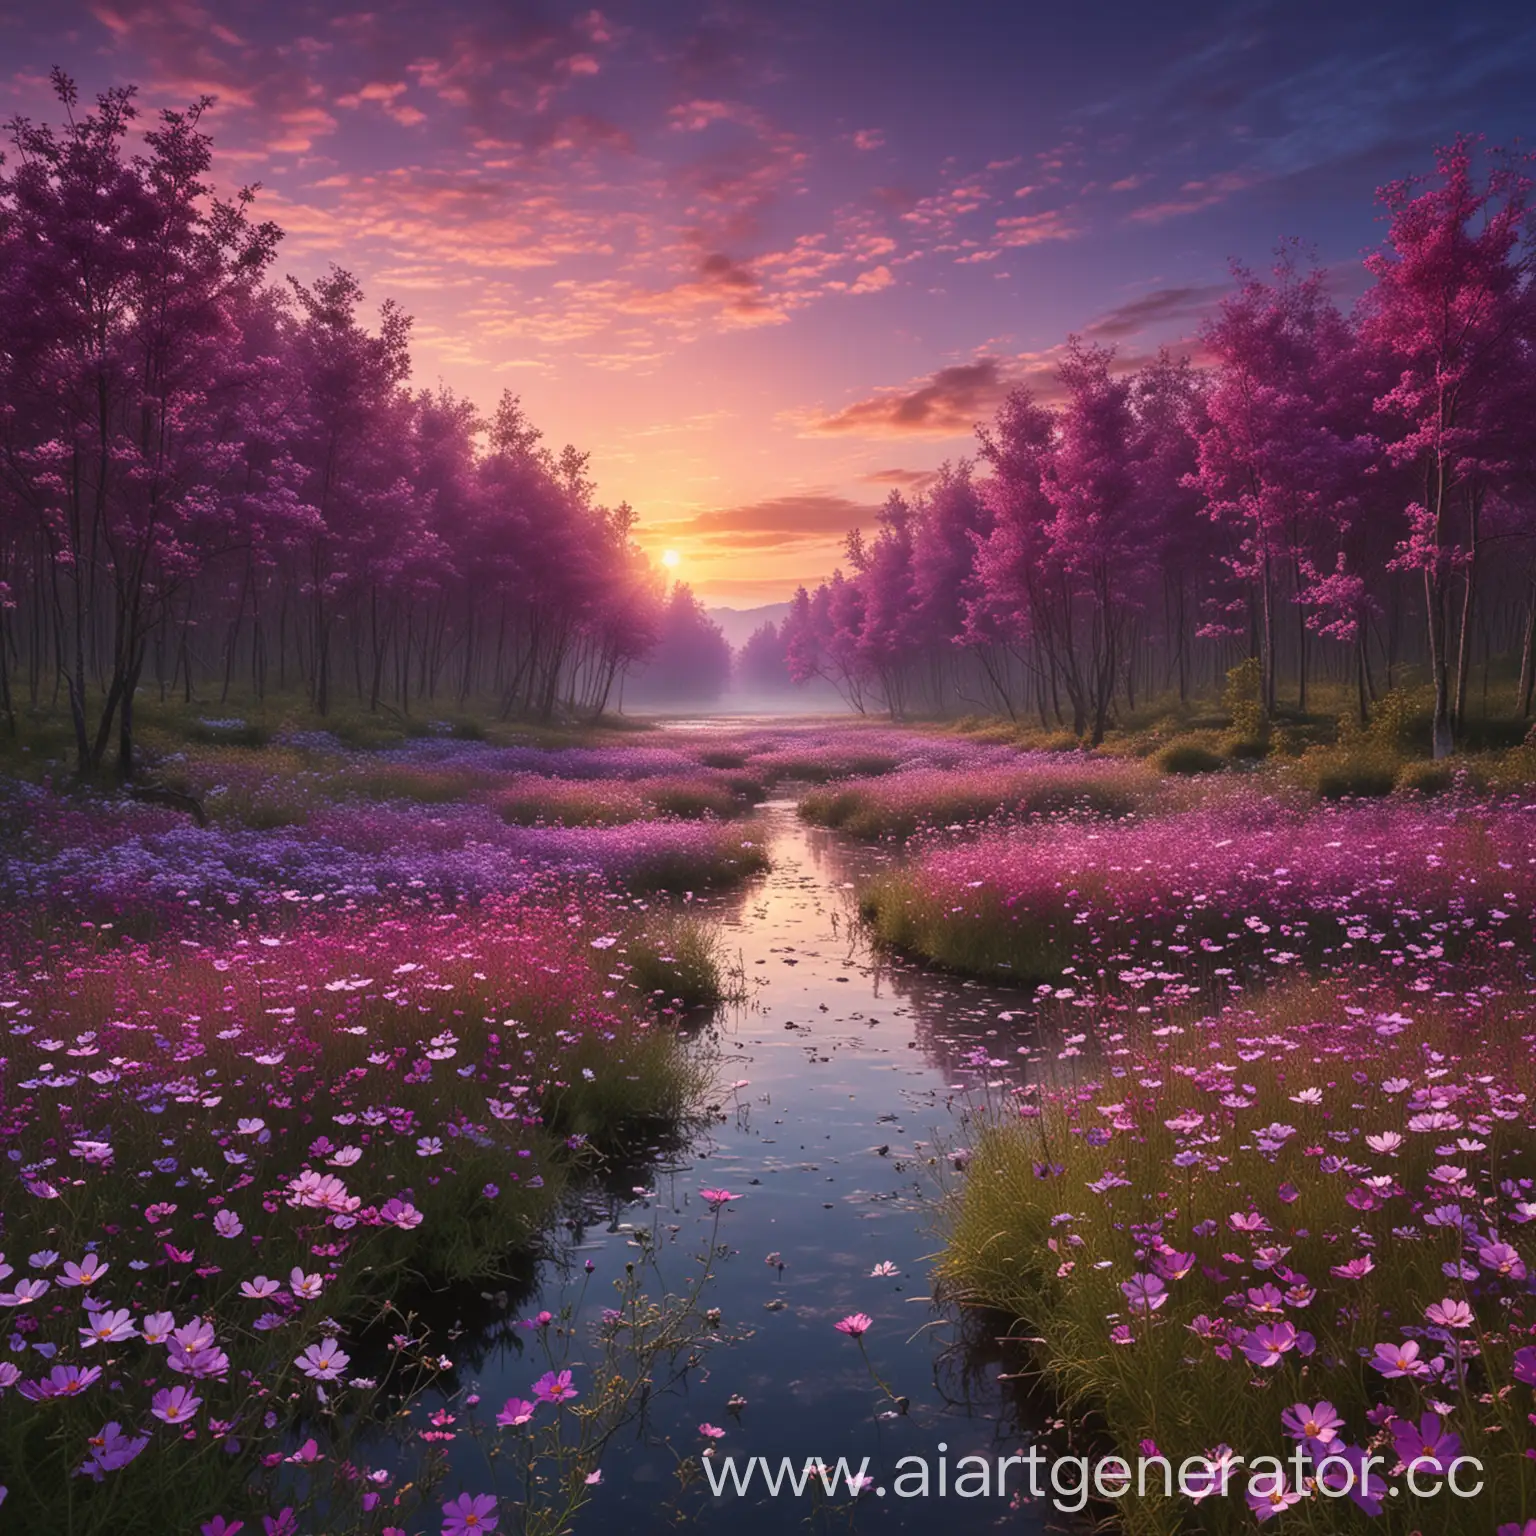 Vibrant-Sunset-Forest-Blooming-Woods-Alongside-Violet-River-in-Cosmos-Style